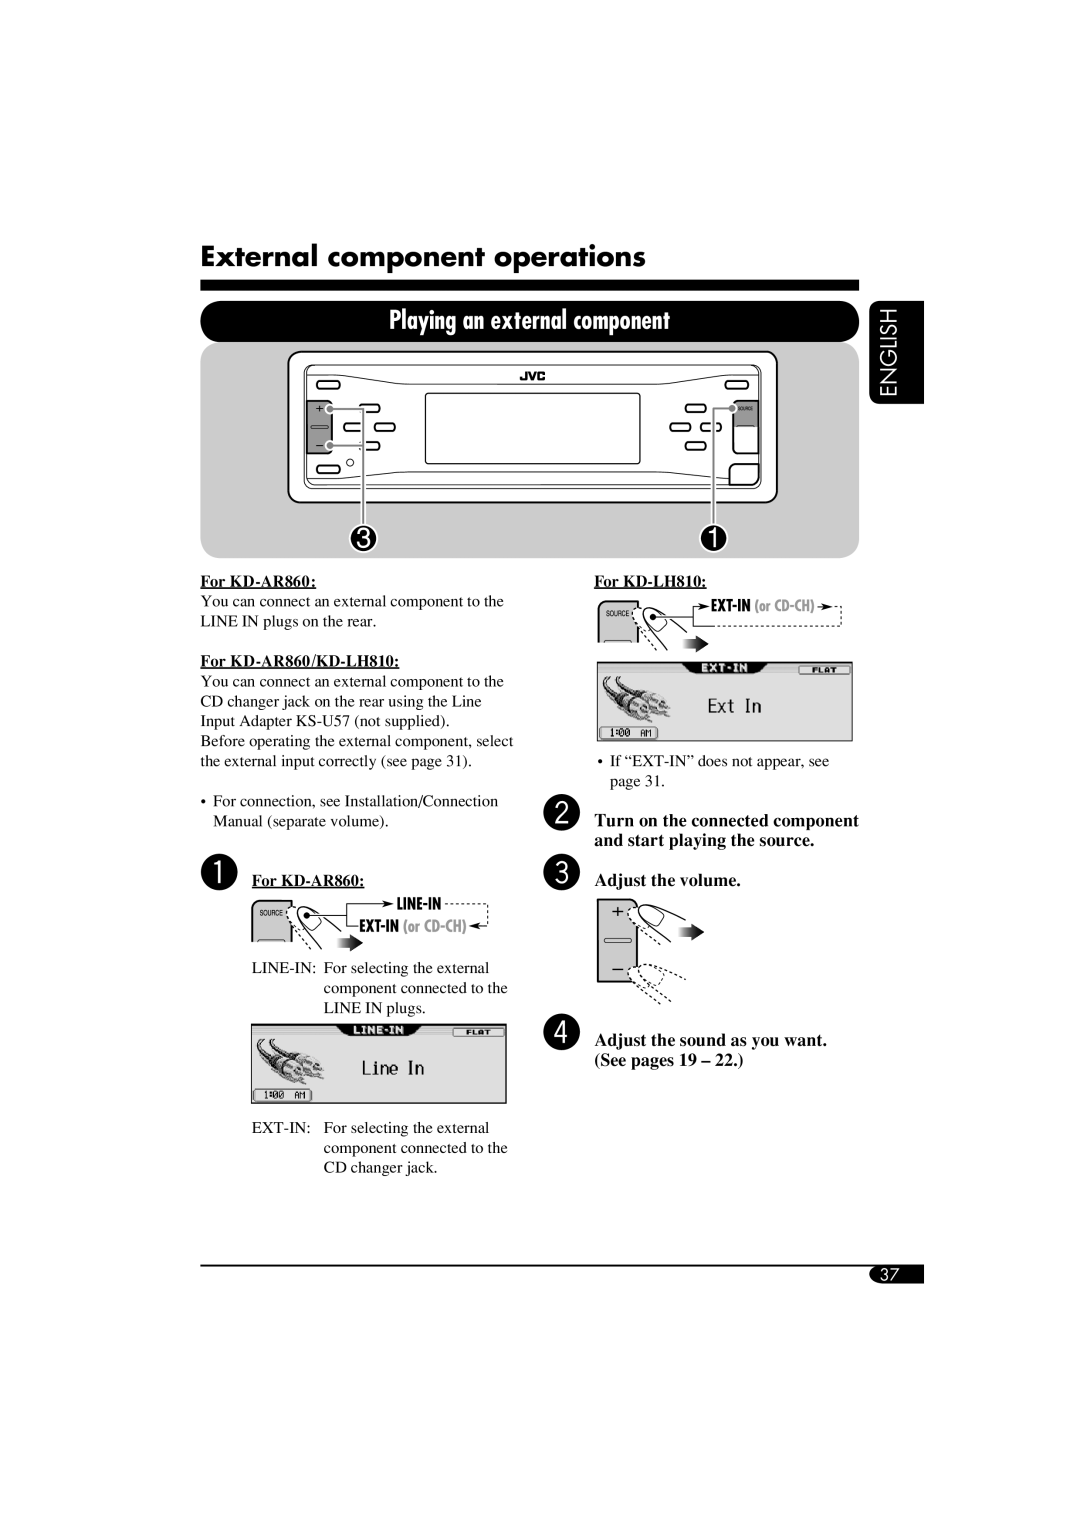 JVC KD-LH810 manual External component operations, Playing an external component, English, Adjust the volume, For KD-AR860 